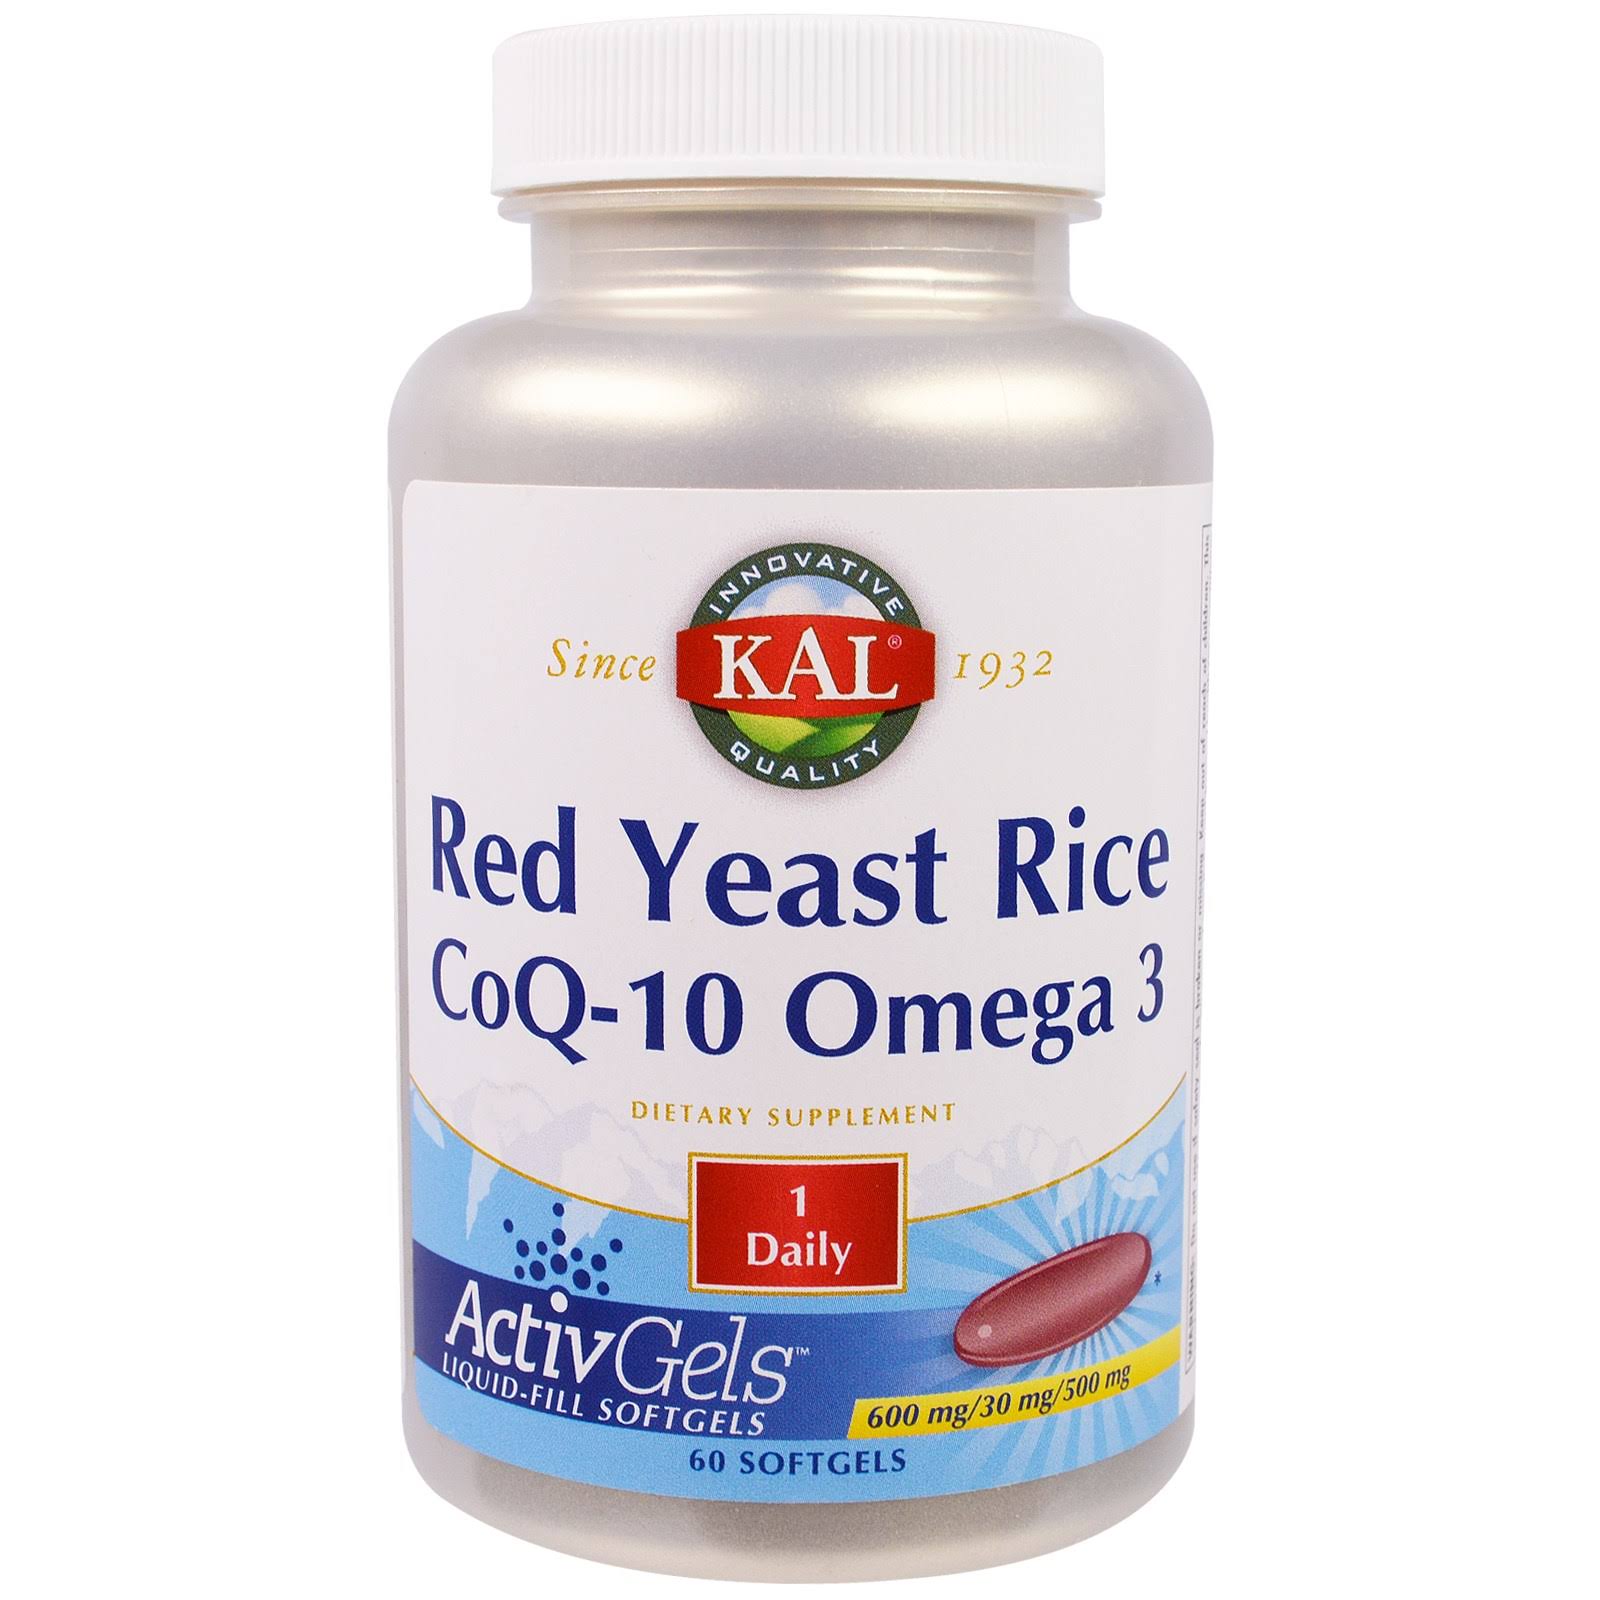 Kal Red Yeast Rice Coq-10 Omega 3 Supplement - 60 Softgels, 600/30/500mg